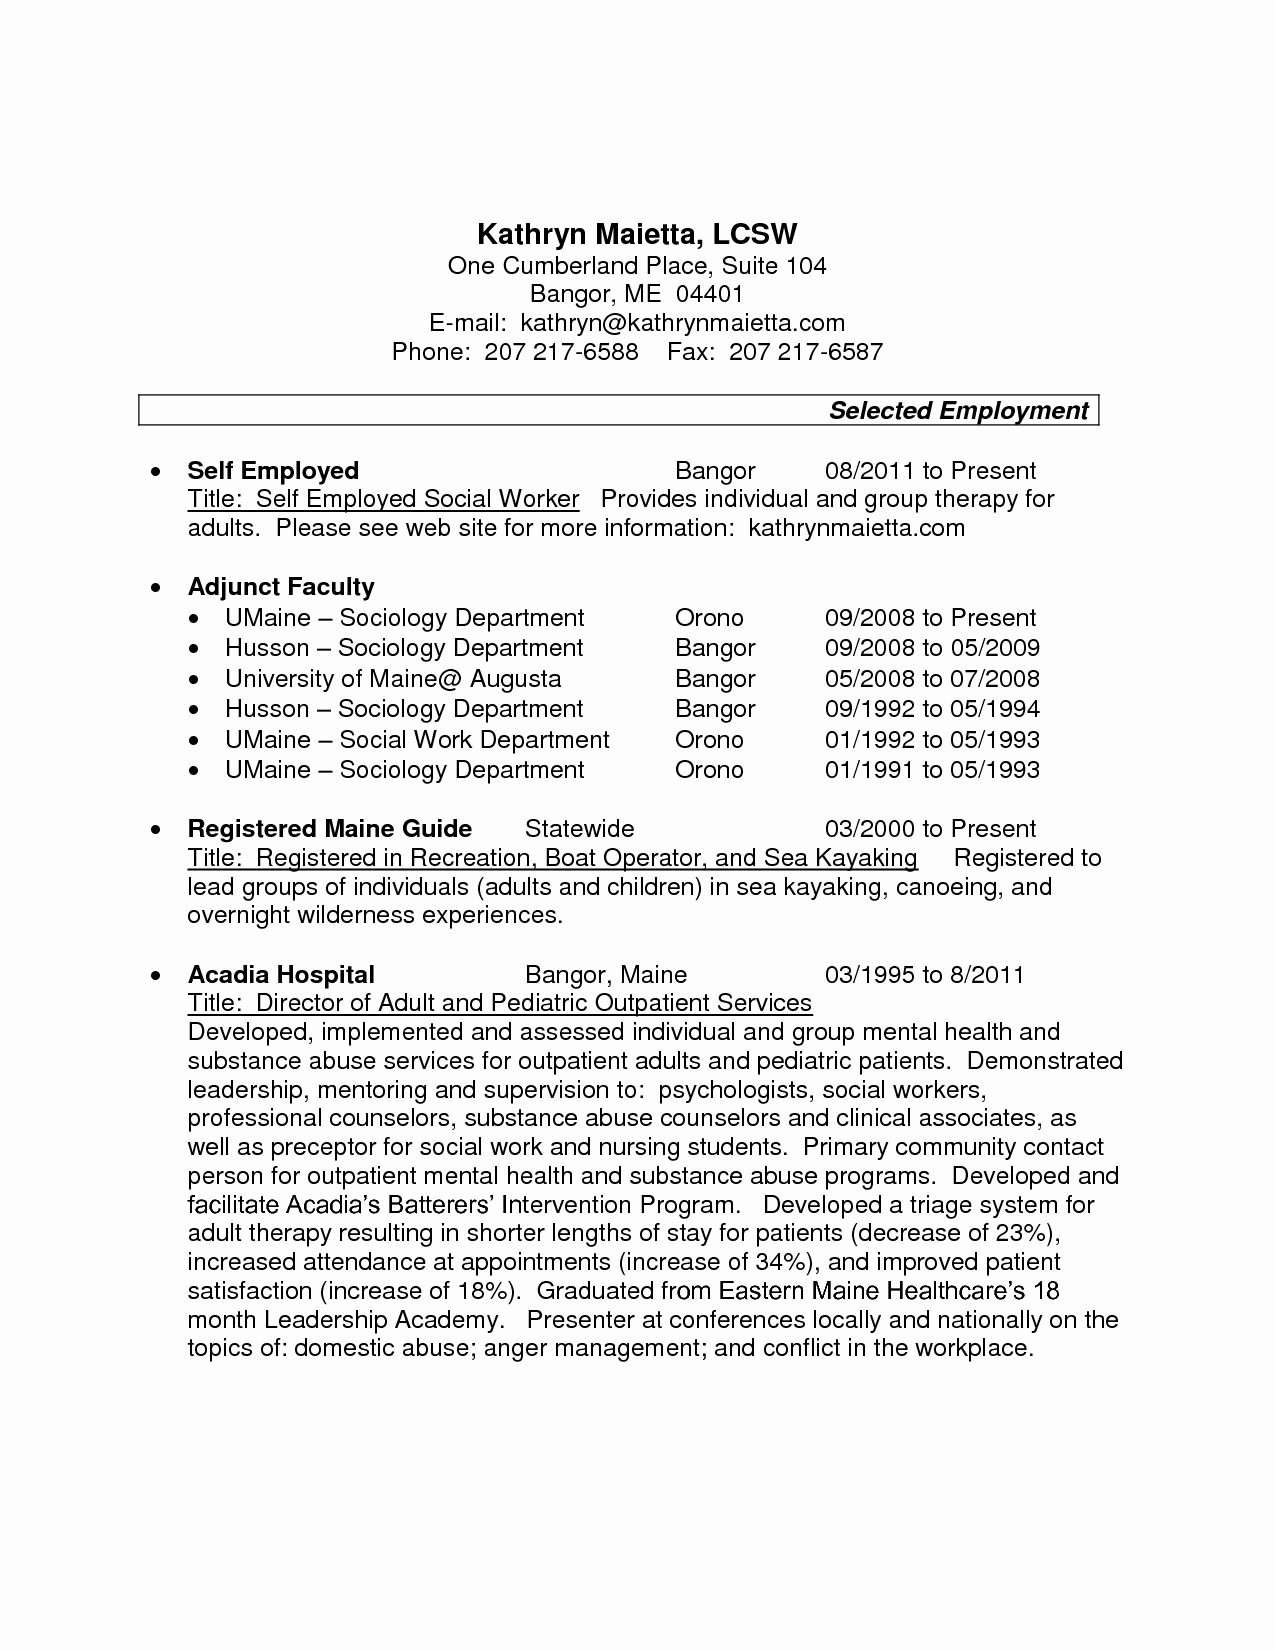 Resume Examples for Self Employed Person You Can Make